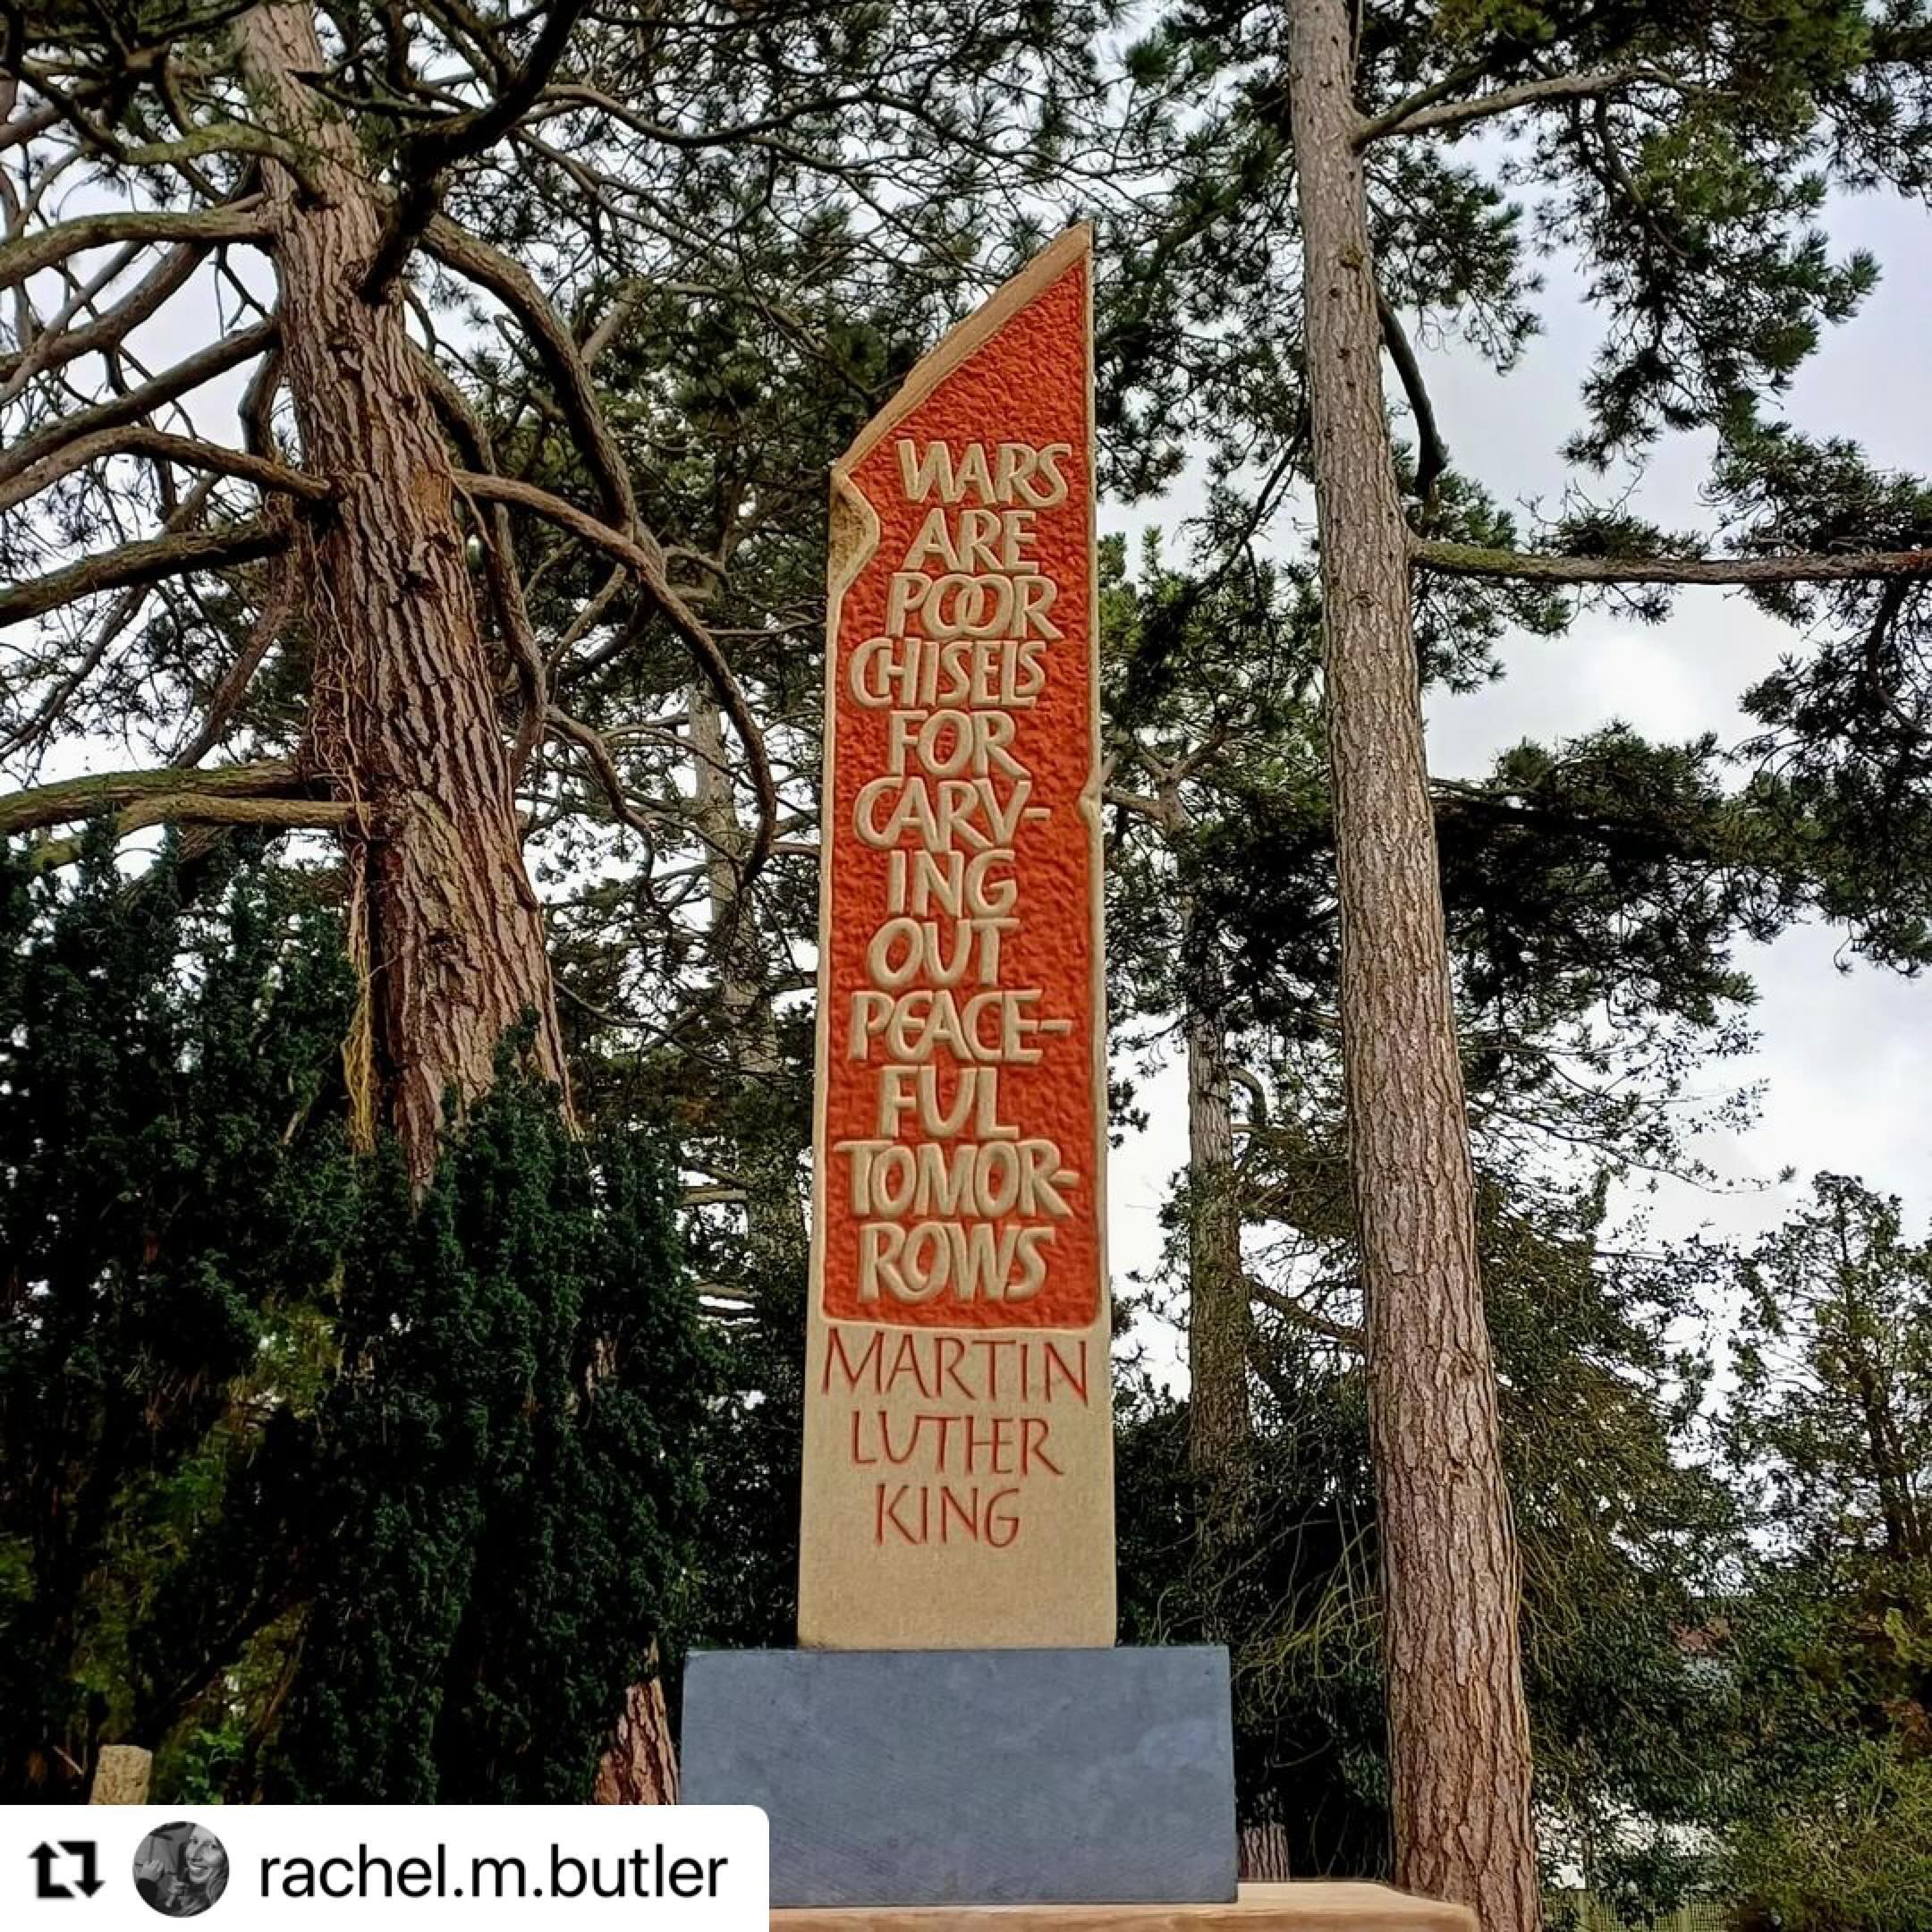 #Repost @rachel.m.butler
・・・
Carved and painted.

A quote by Martin Luther king - Woodkirk, sandstone. The texture of pecking with raised and v-cut lettering, is a great contrast and apt for the subject. Design by Eric.

Documenting my apprenticeship